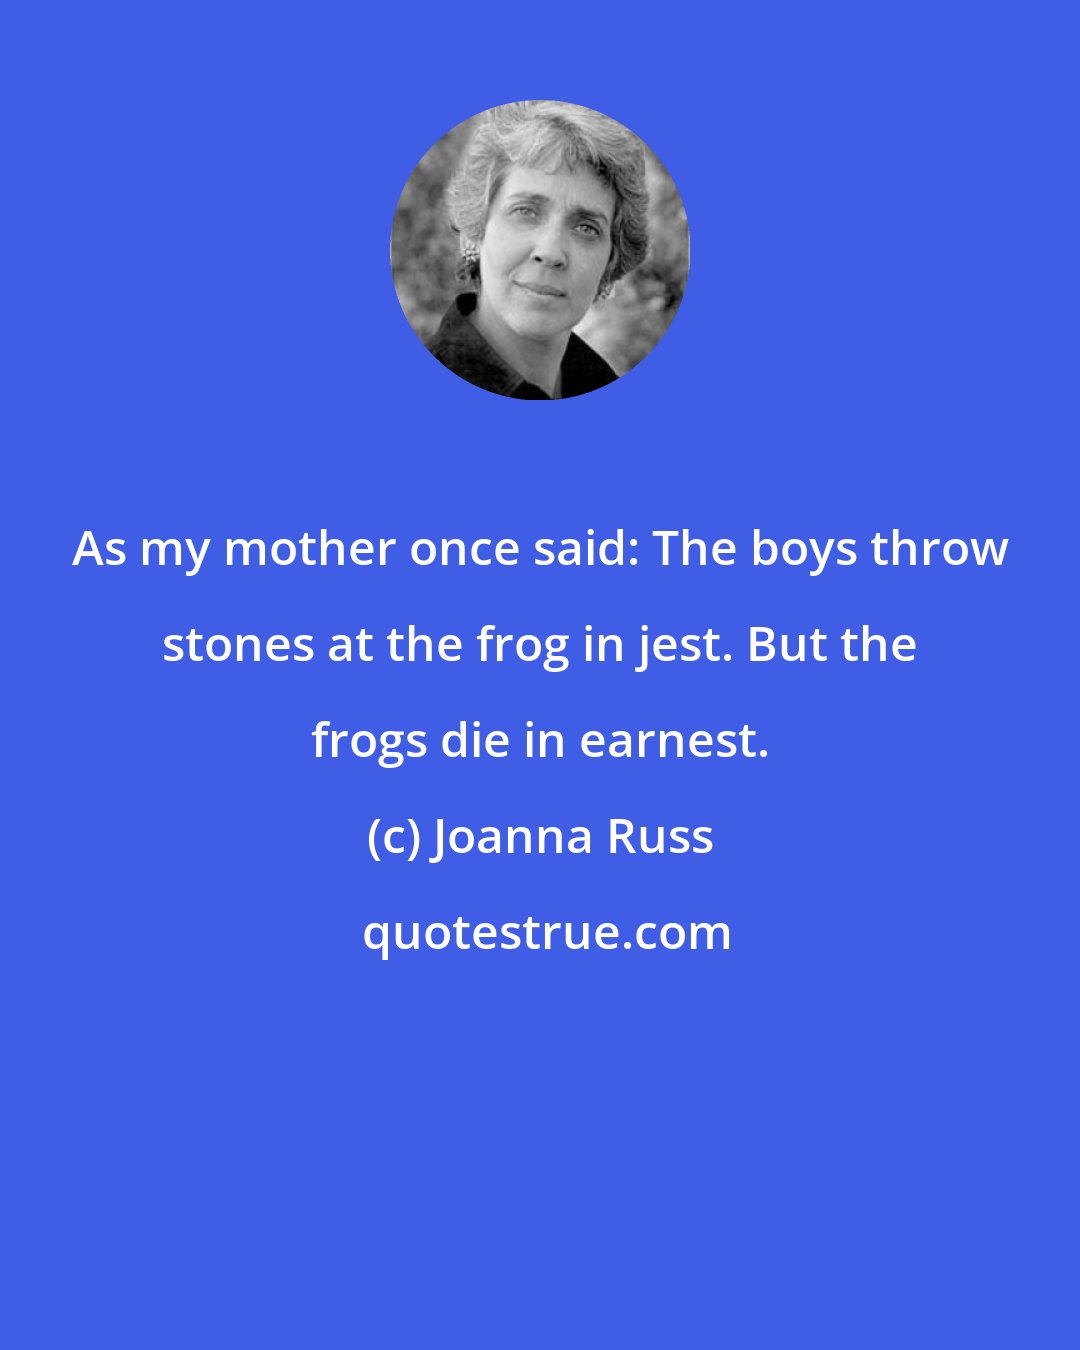 Joanna Russ: As my mother once said: The boys throw stones at the frog in jest. But the frogs die in earnest.